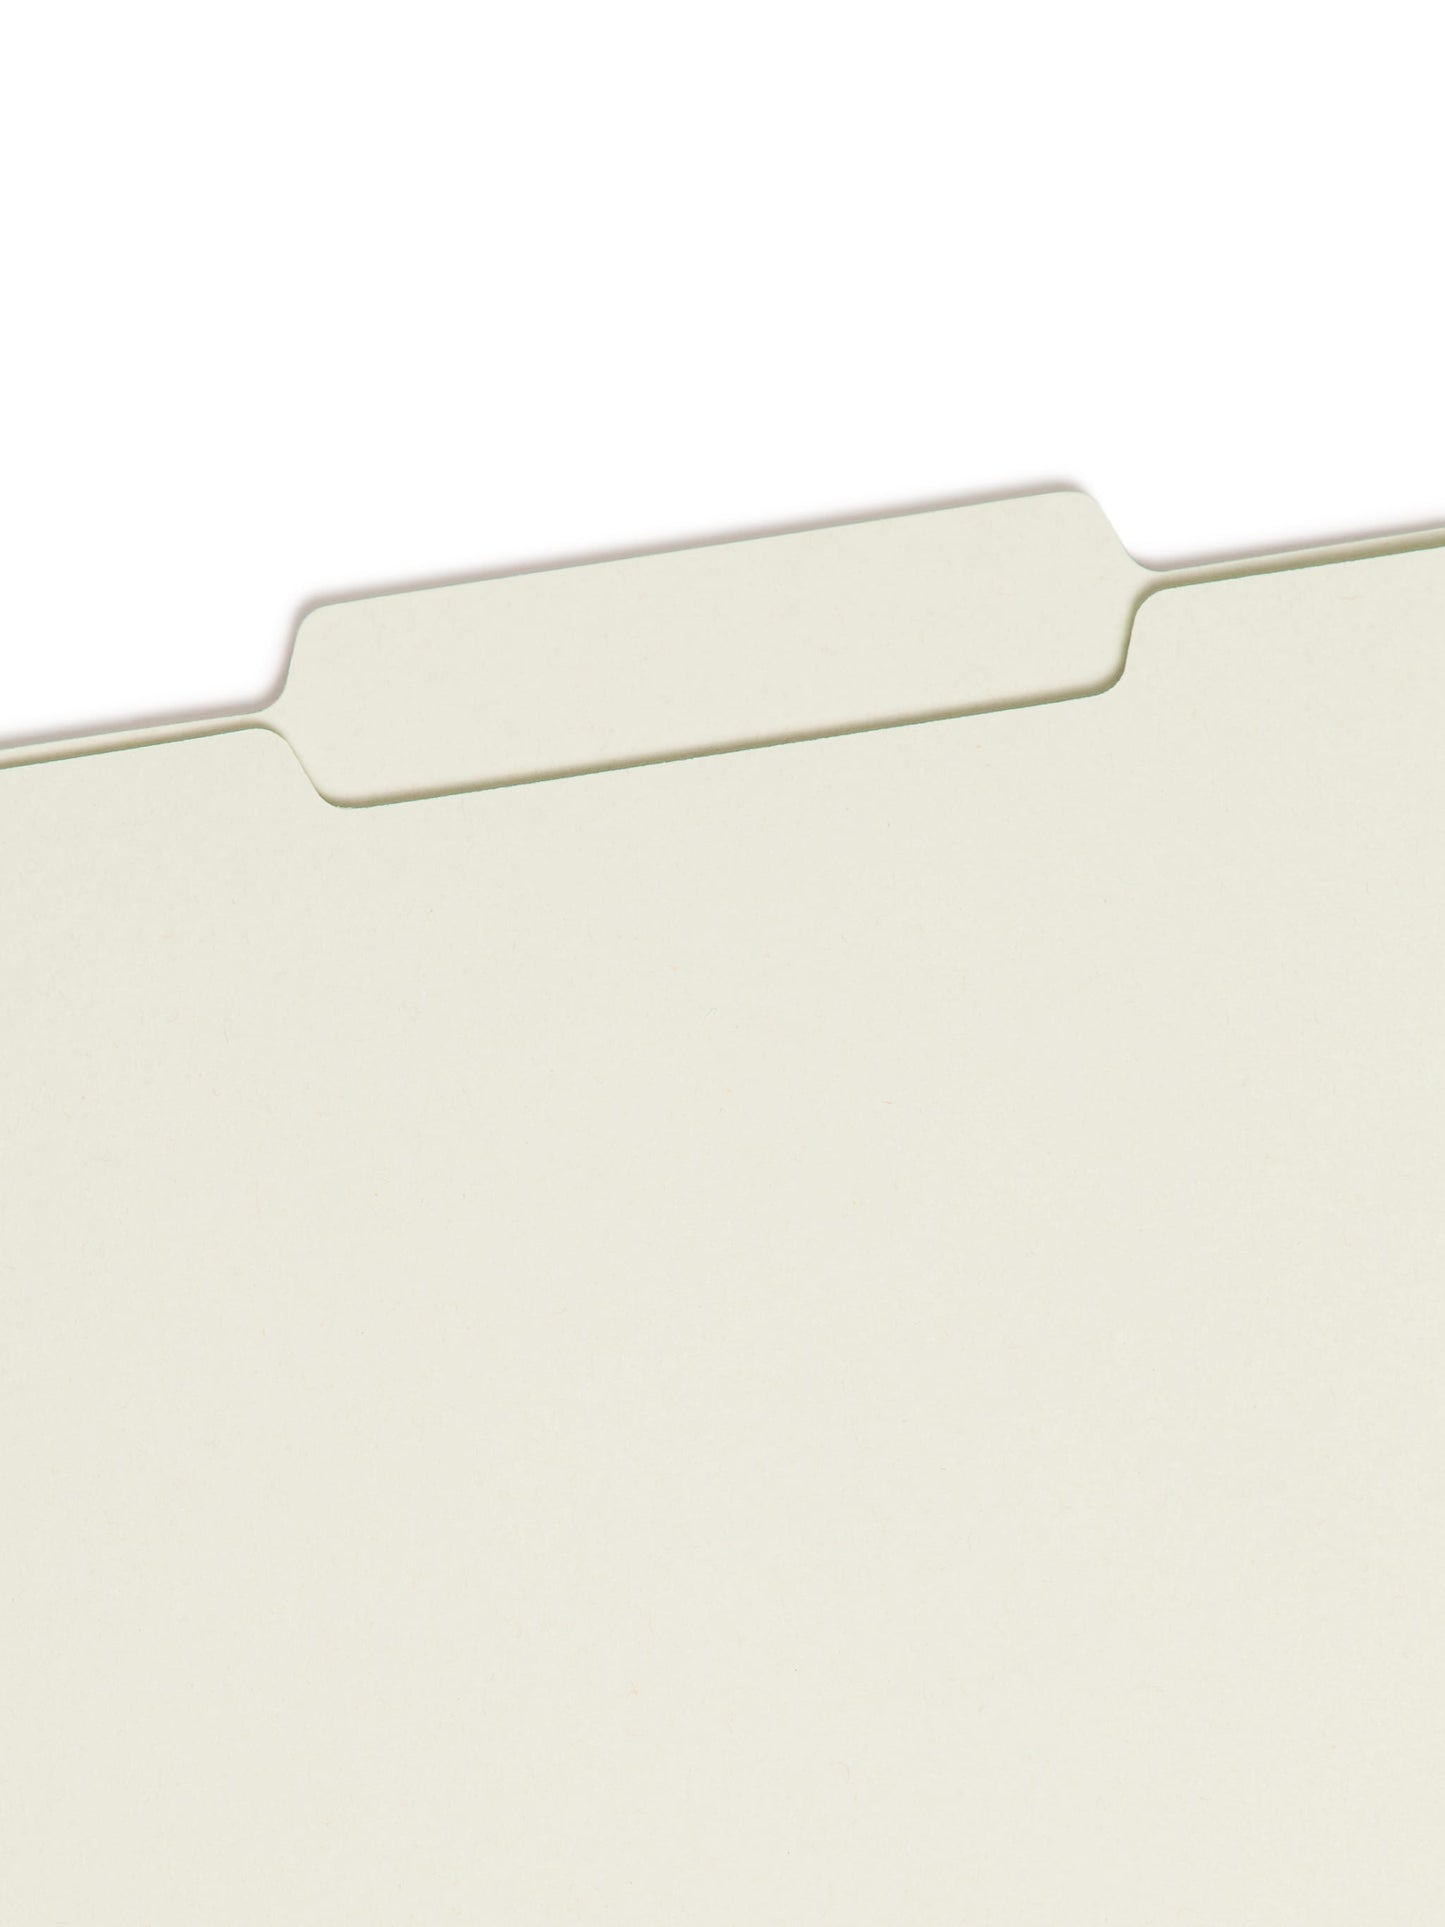 SafeSHIELD® Pressboard Fastener File Folders, 2/5-Cut Guide Height Right of Center Tab, Gray/Green Color, Legal Size, 